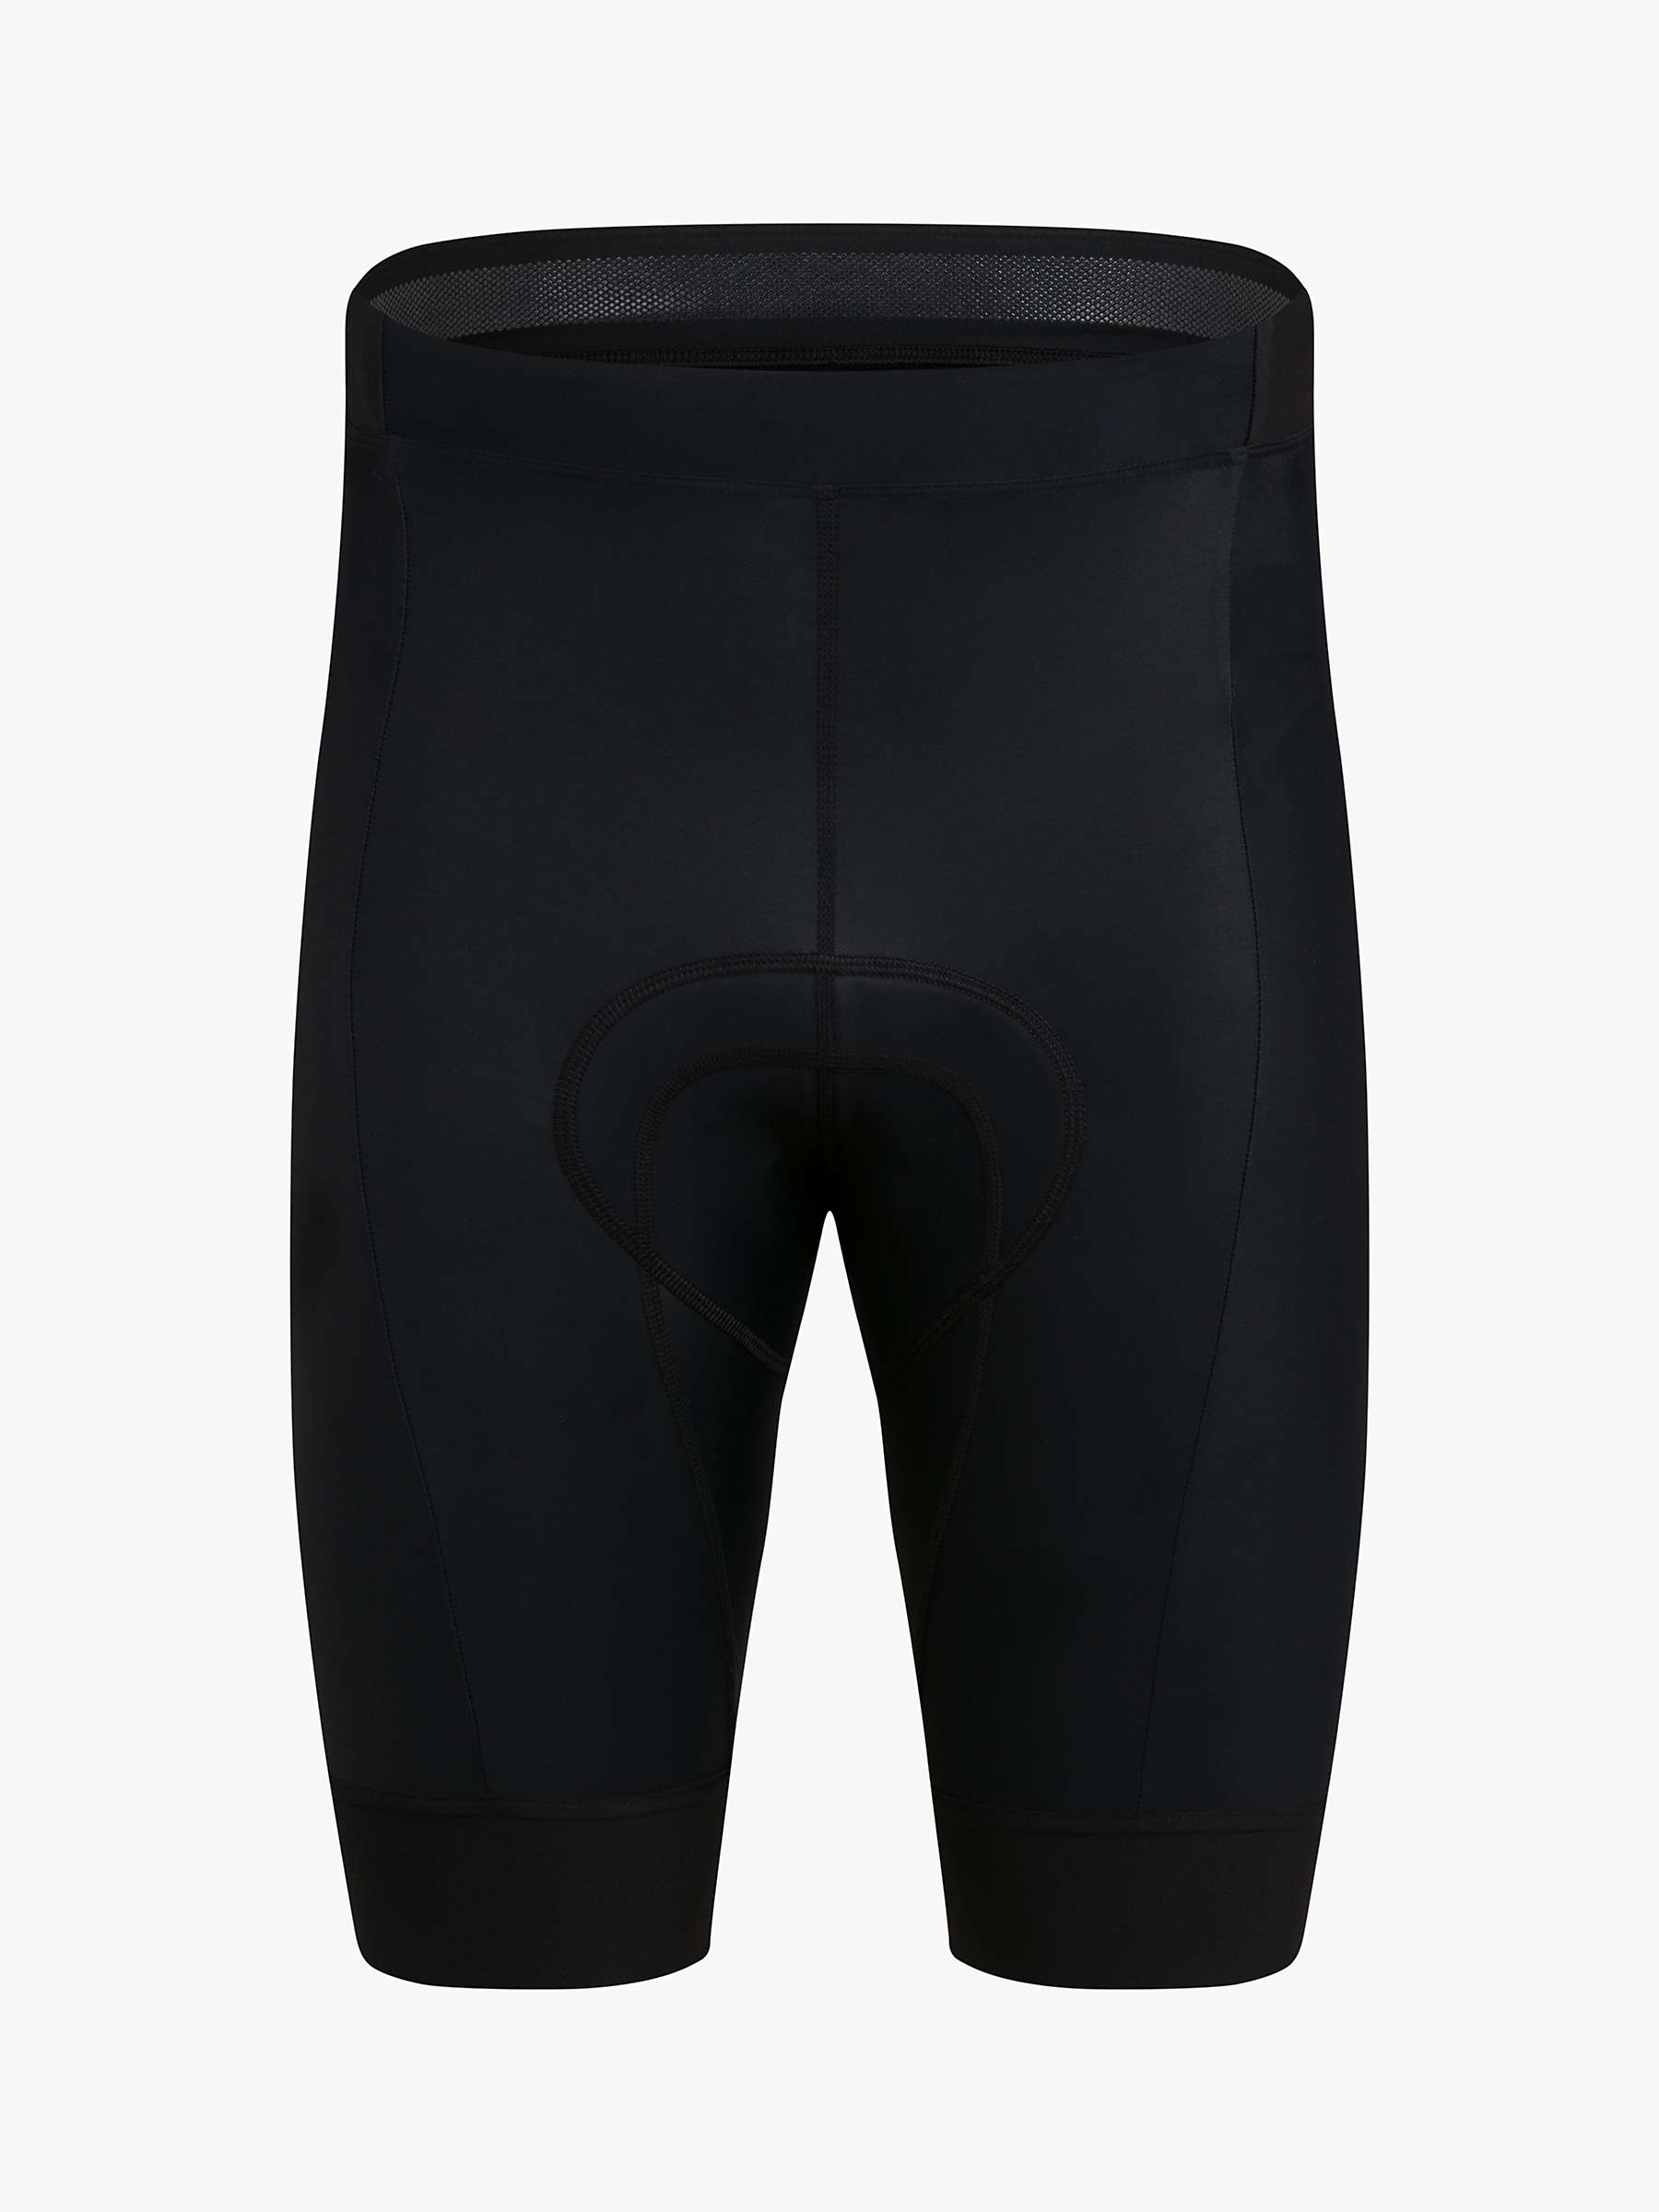 Buy Rapha Core Cycling Shorts Online at johnlewis.com